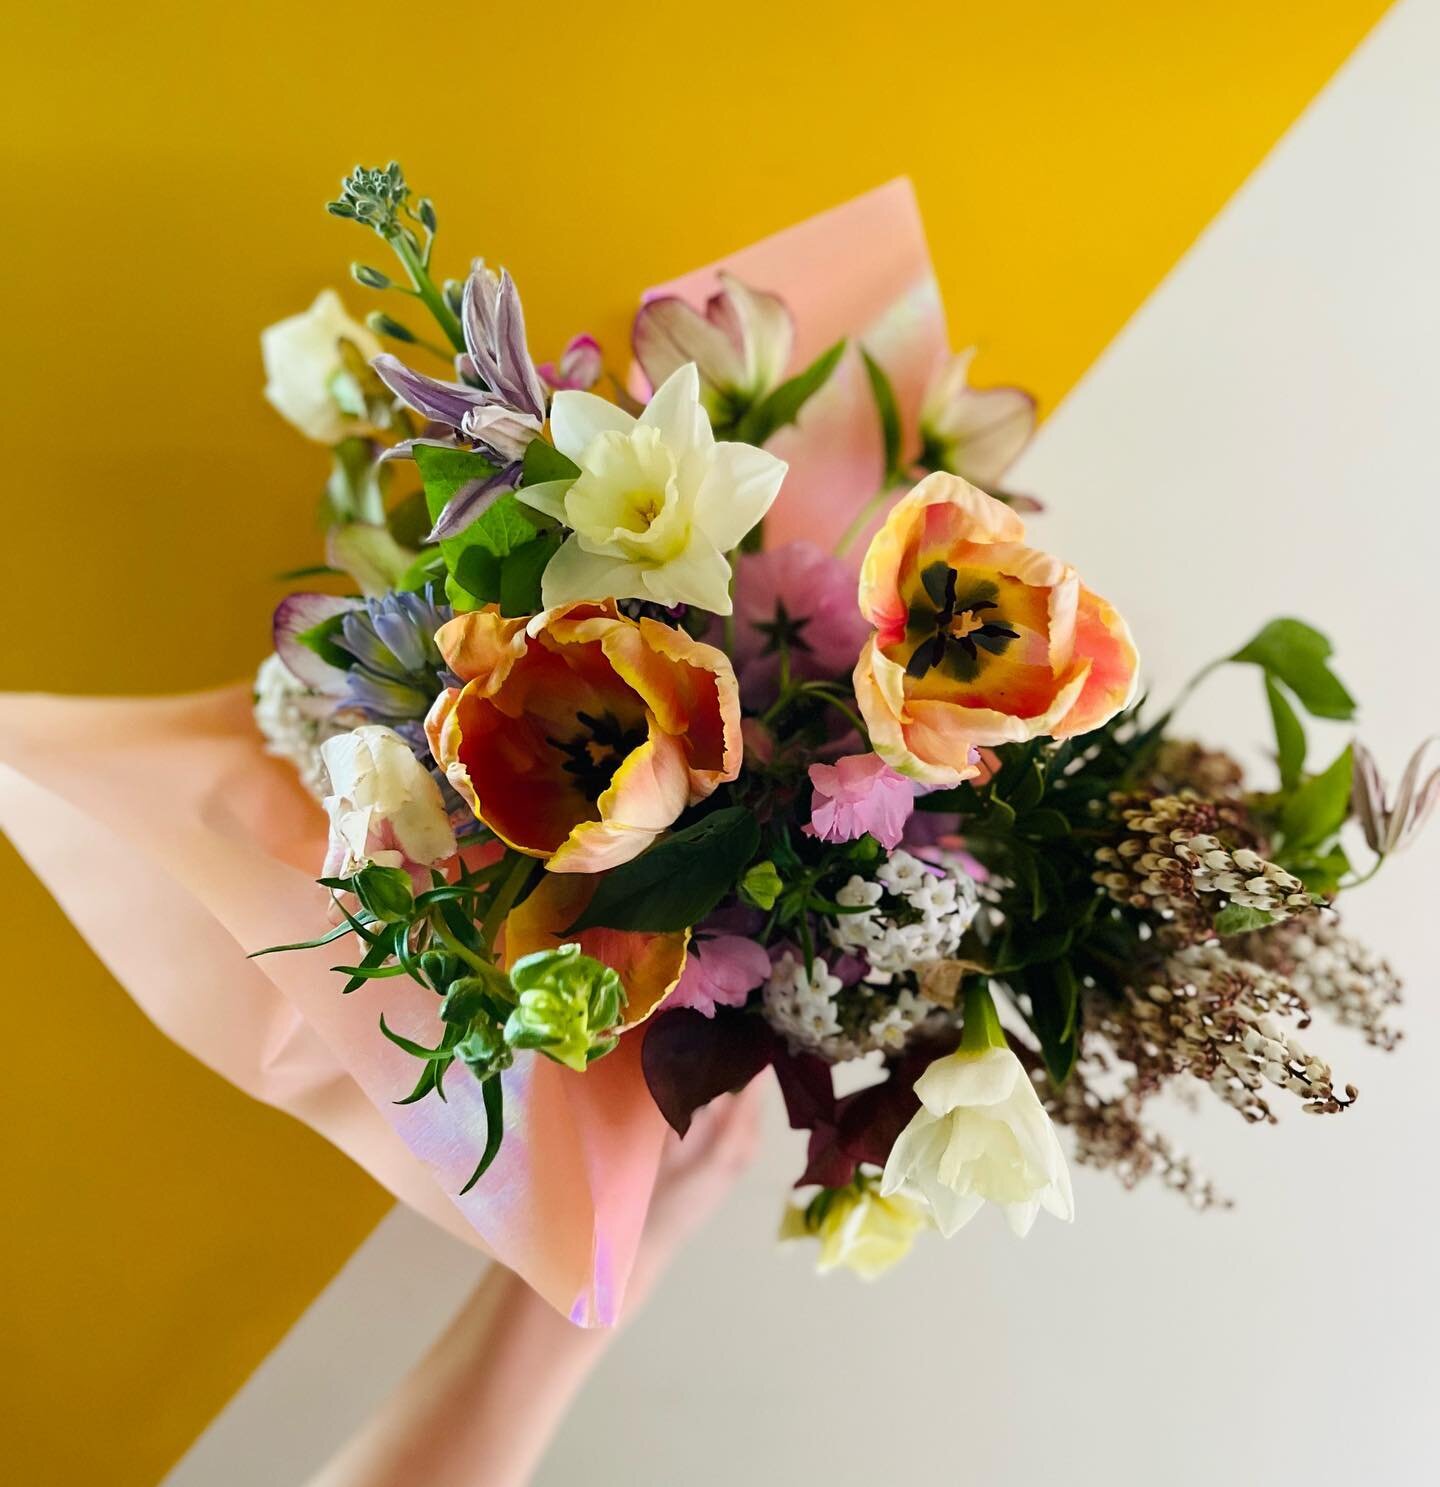 We&rsquo;re so excited to have these beautiful bouquets from @feral_botanical available in the shop tomorrow along with a big ol&rsquo; bake. 
Reminder that we&rsquo;re closed Sunday and Monday this week.

🥐:
Butter 
Chocolate 
Almond
Morning Buns
S